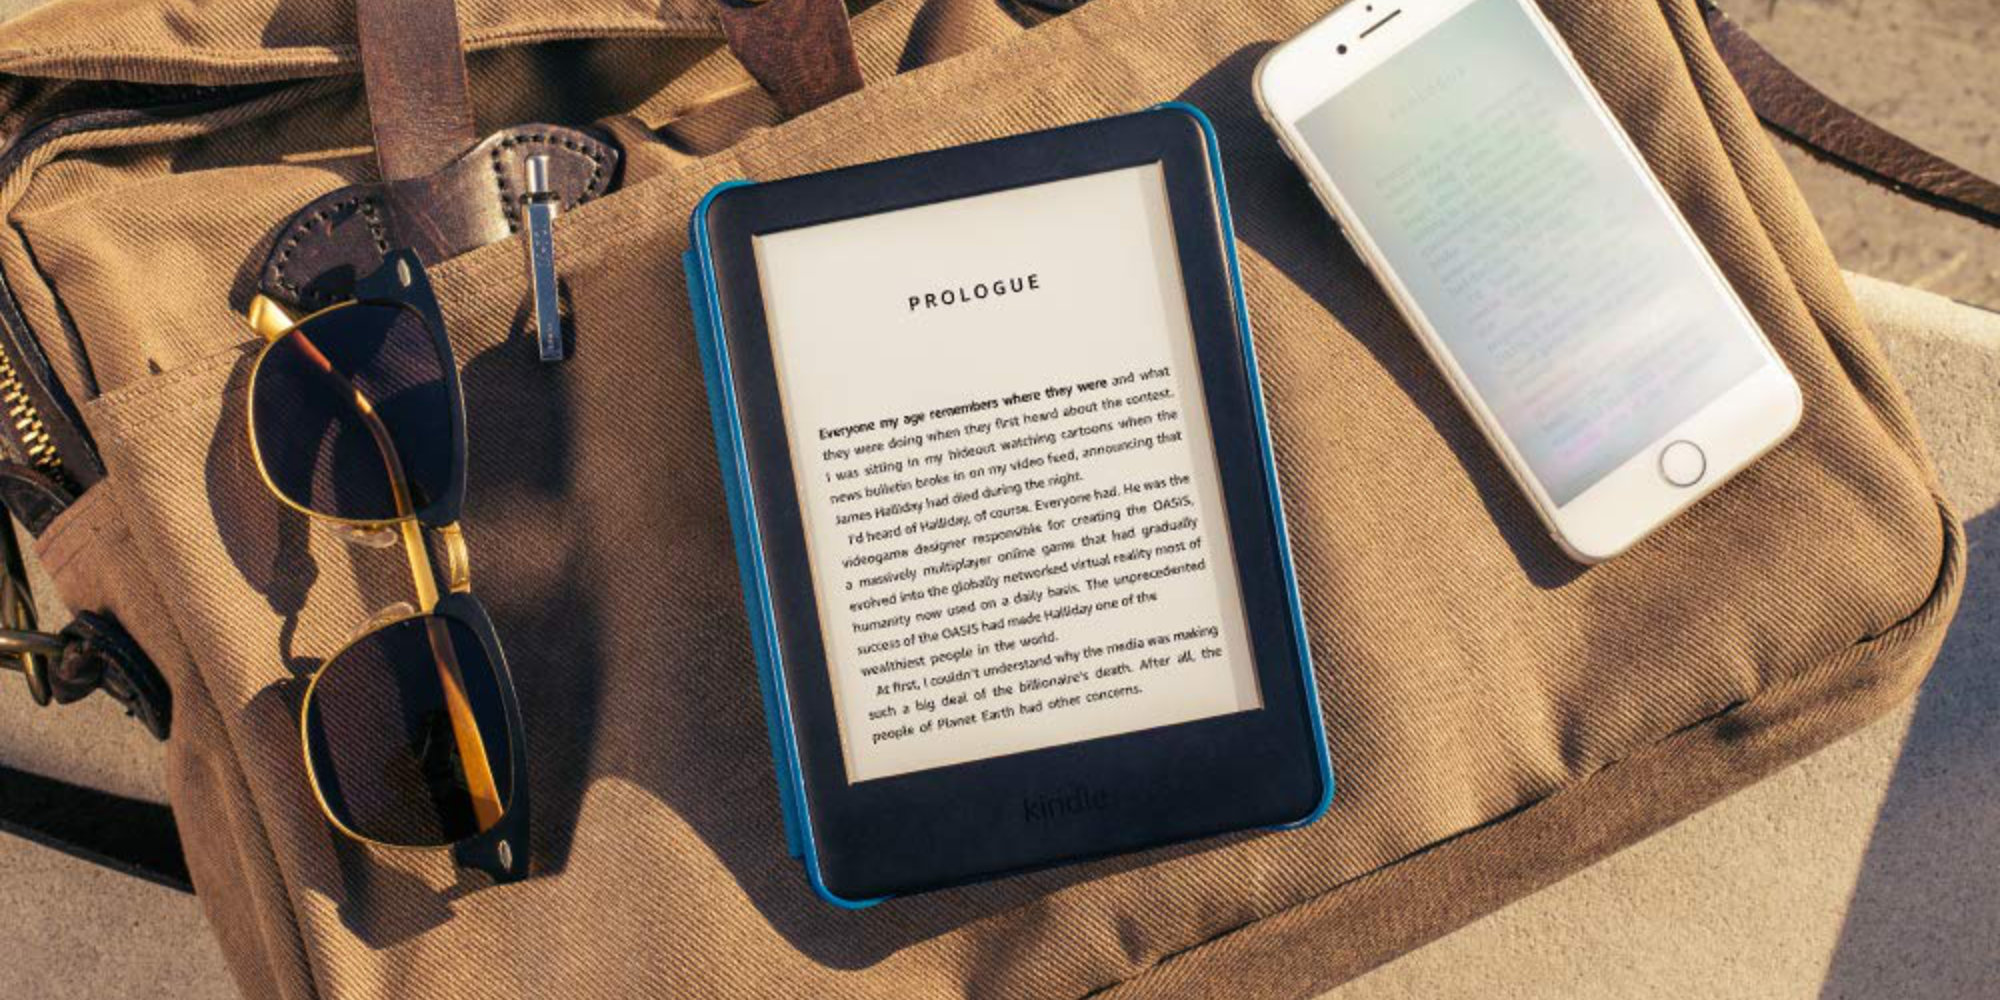 Amazon's latest Kindles are on sale from 65 with near alltime low